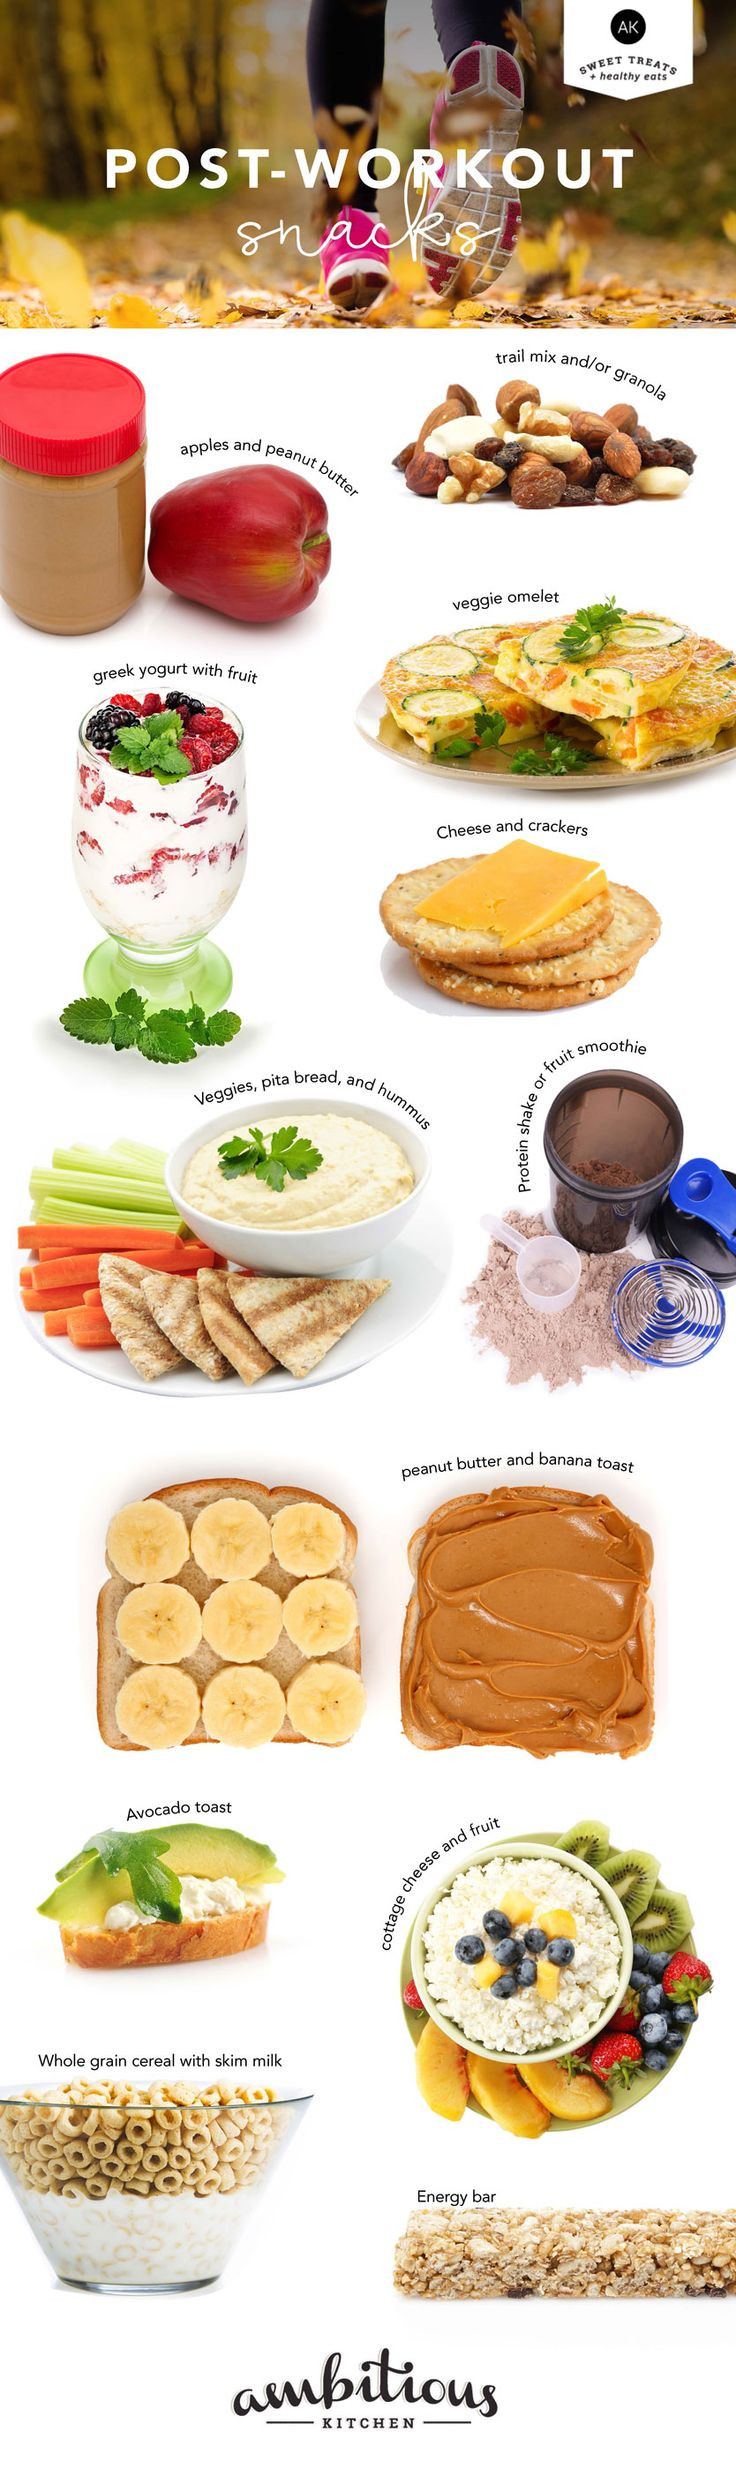 Post Workout Fat Burning Food
 Wellness Wednesday 12 Healthy Post Workout Snacks When